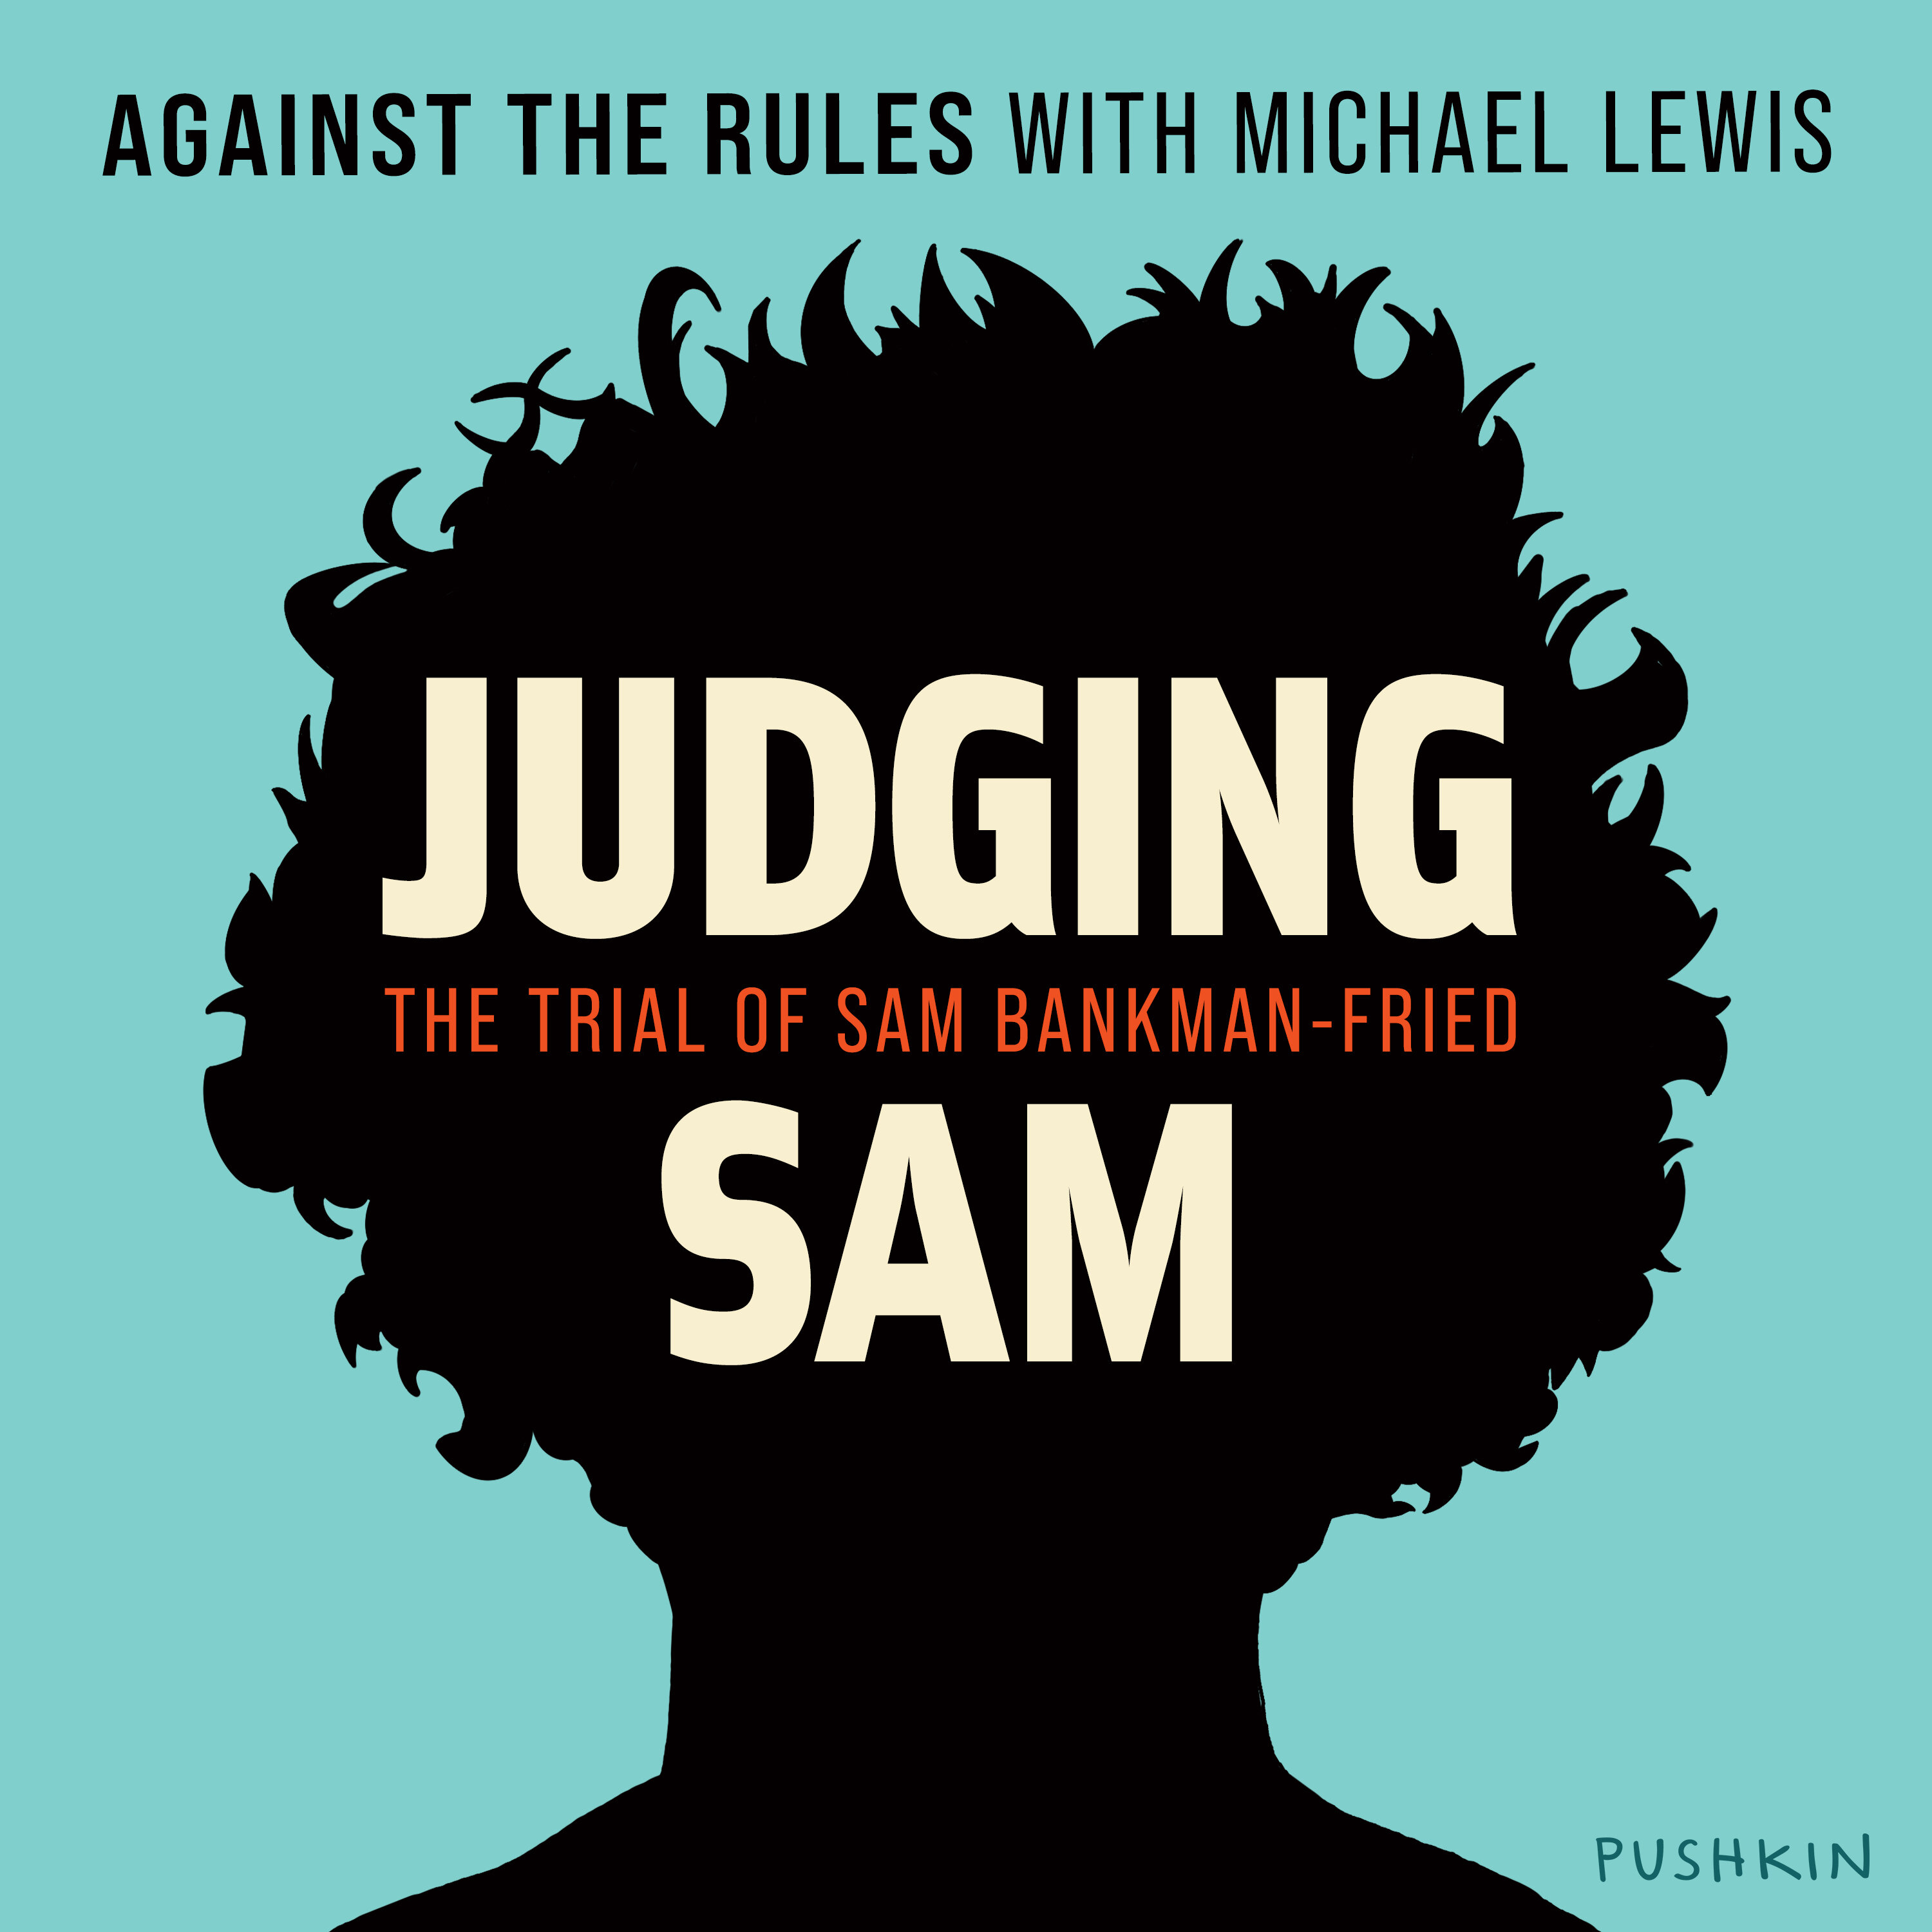 Against the Rules with Michael Lewis: The Trial of Sam Bankman-Fried podcast